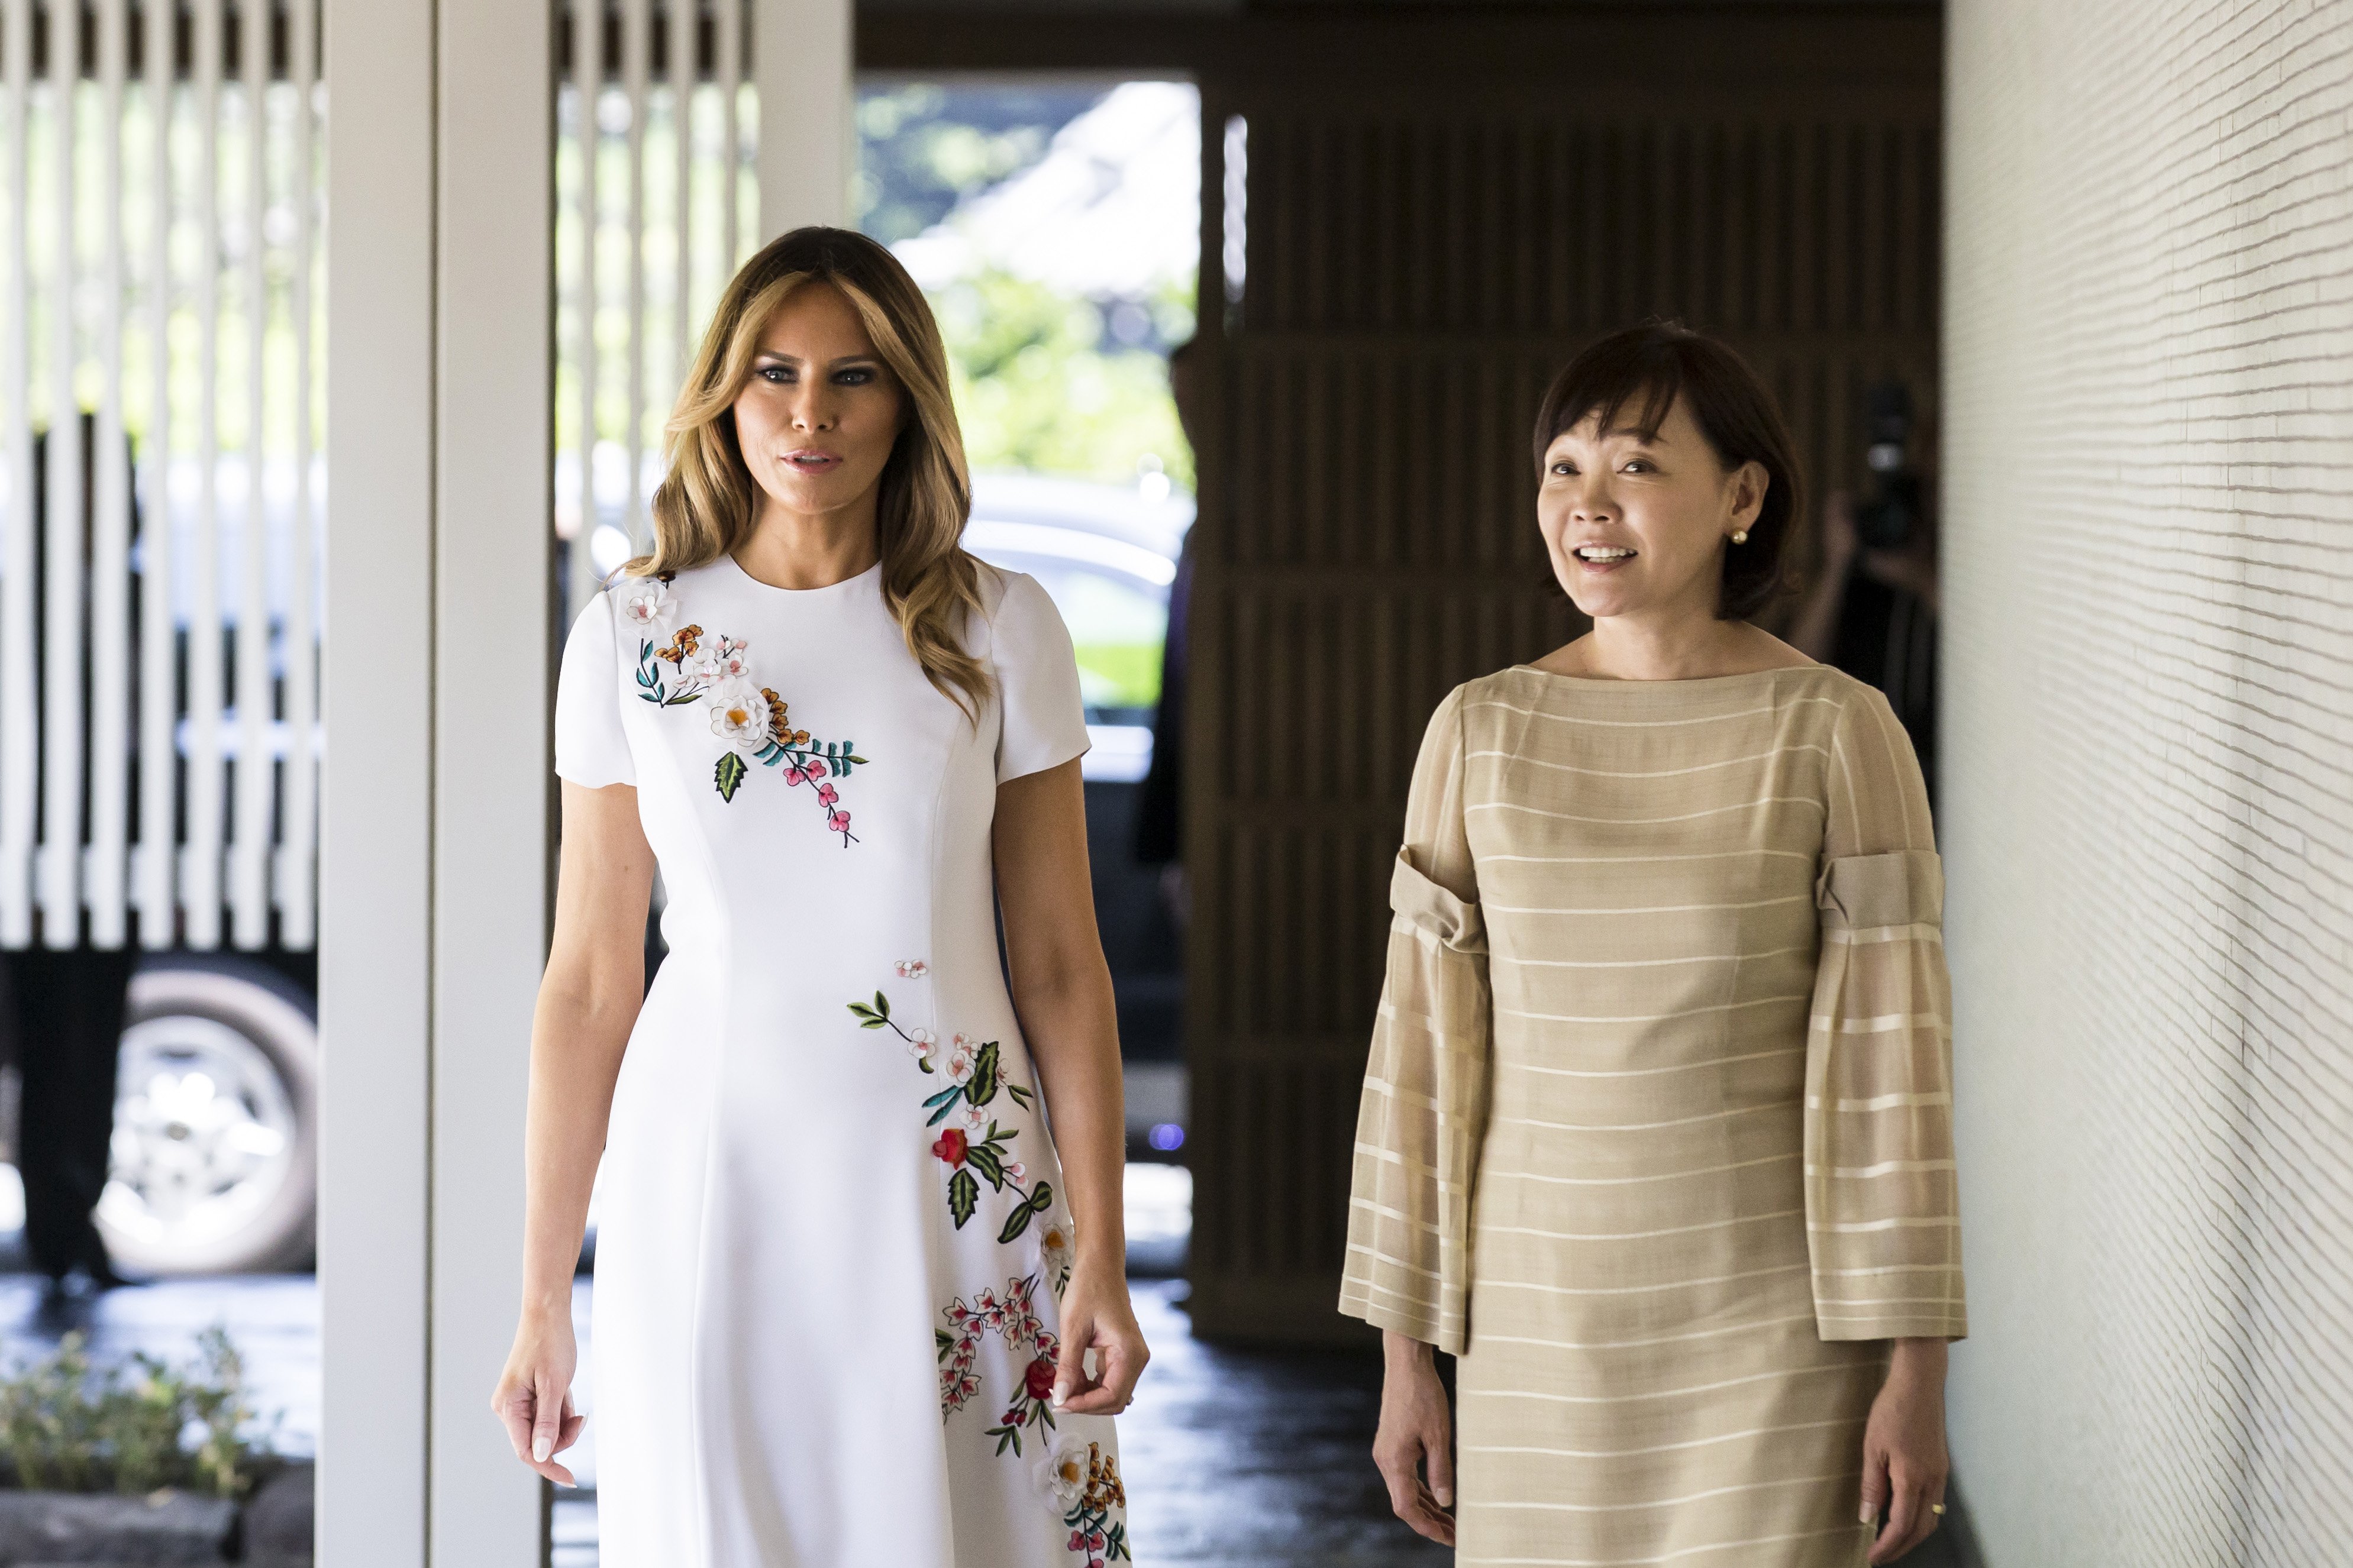 First Lady Melania Trump and Japan's Prime Minister's wife Akie Abe in May 2019 | Photo: Getty Images